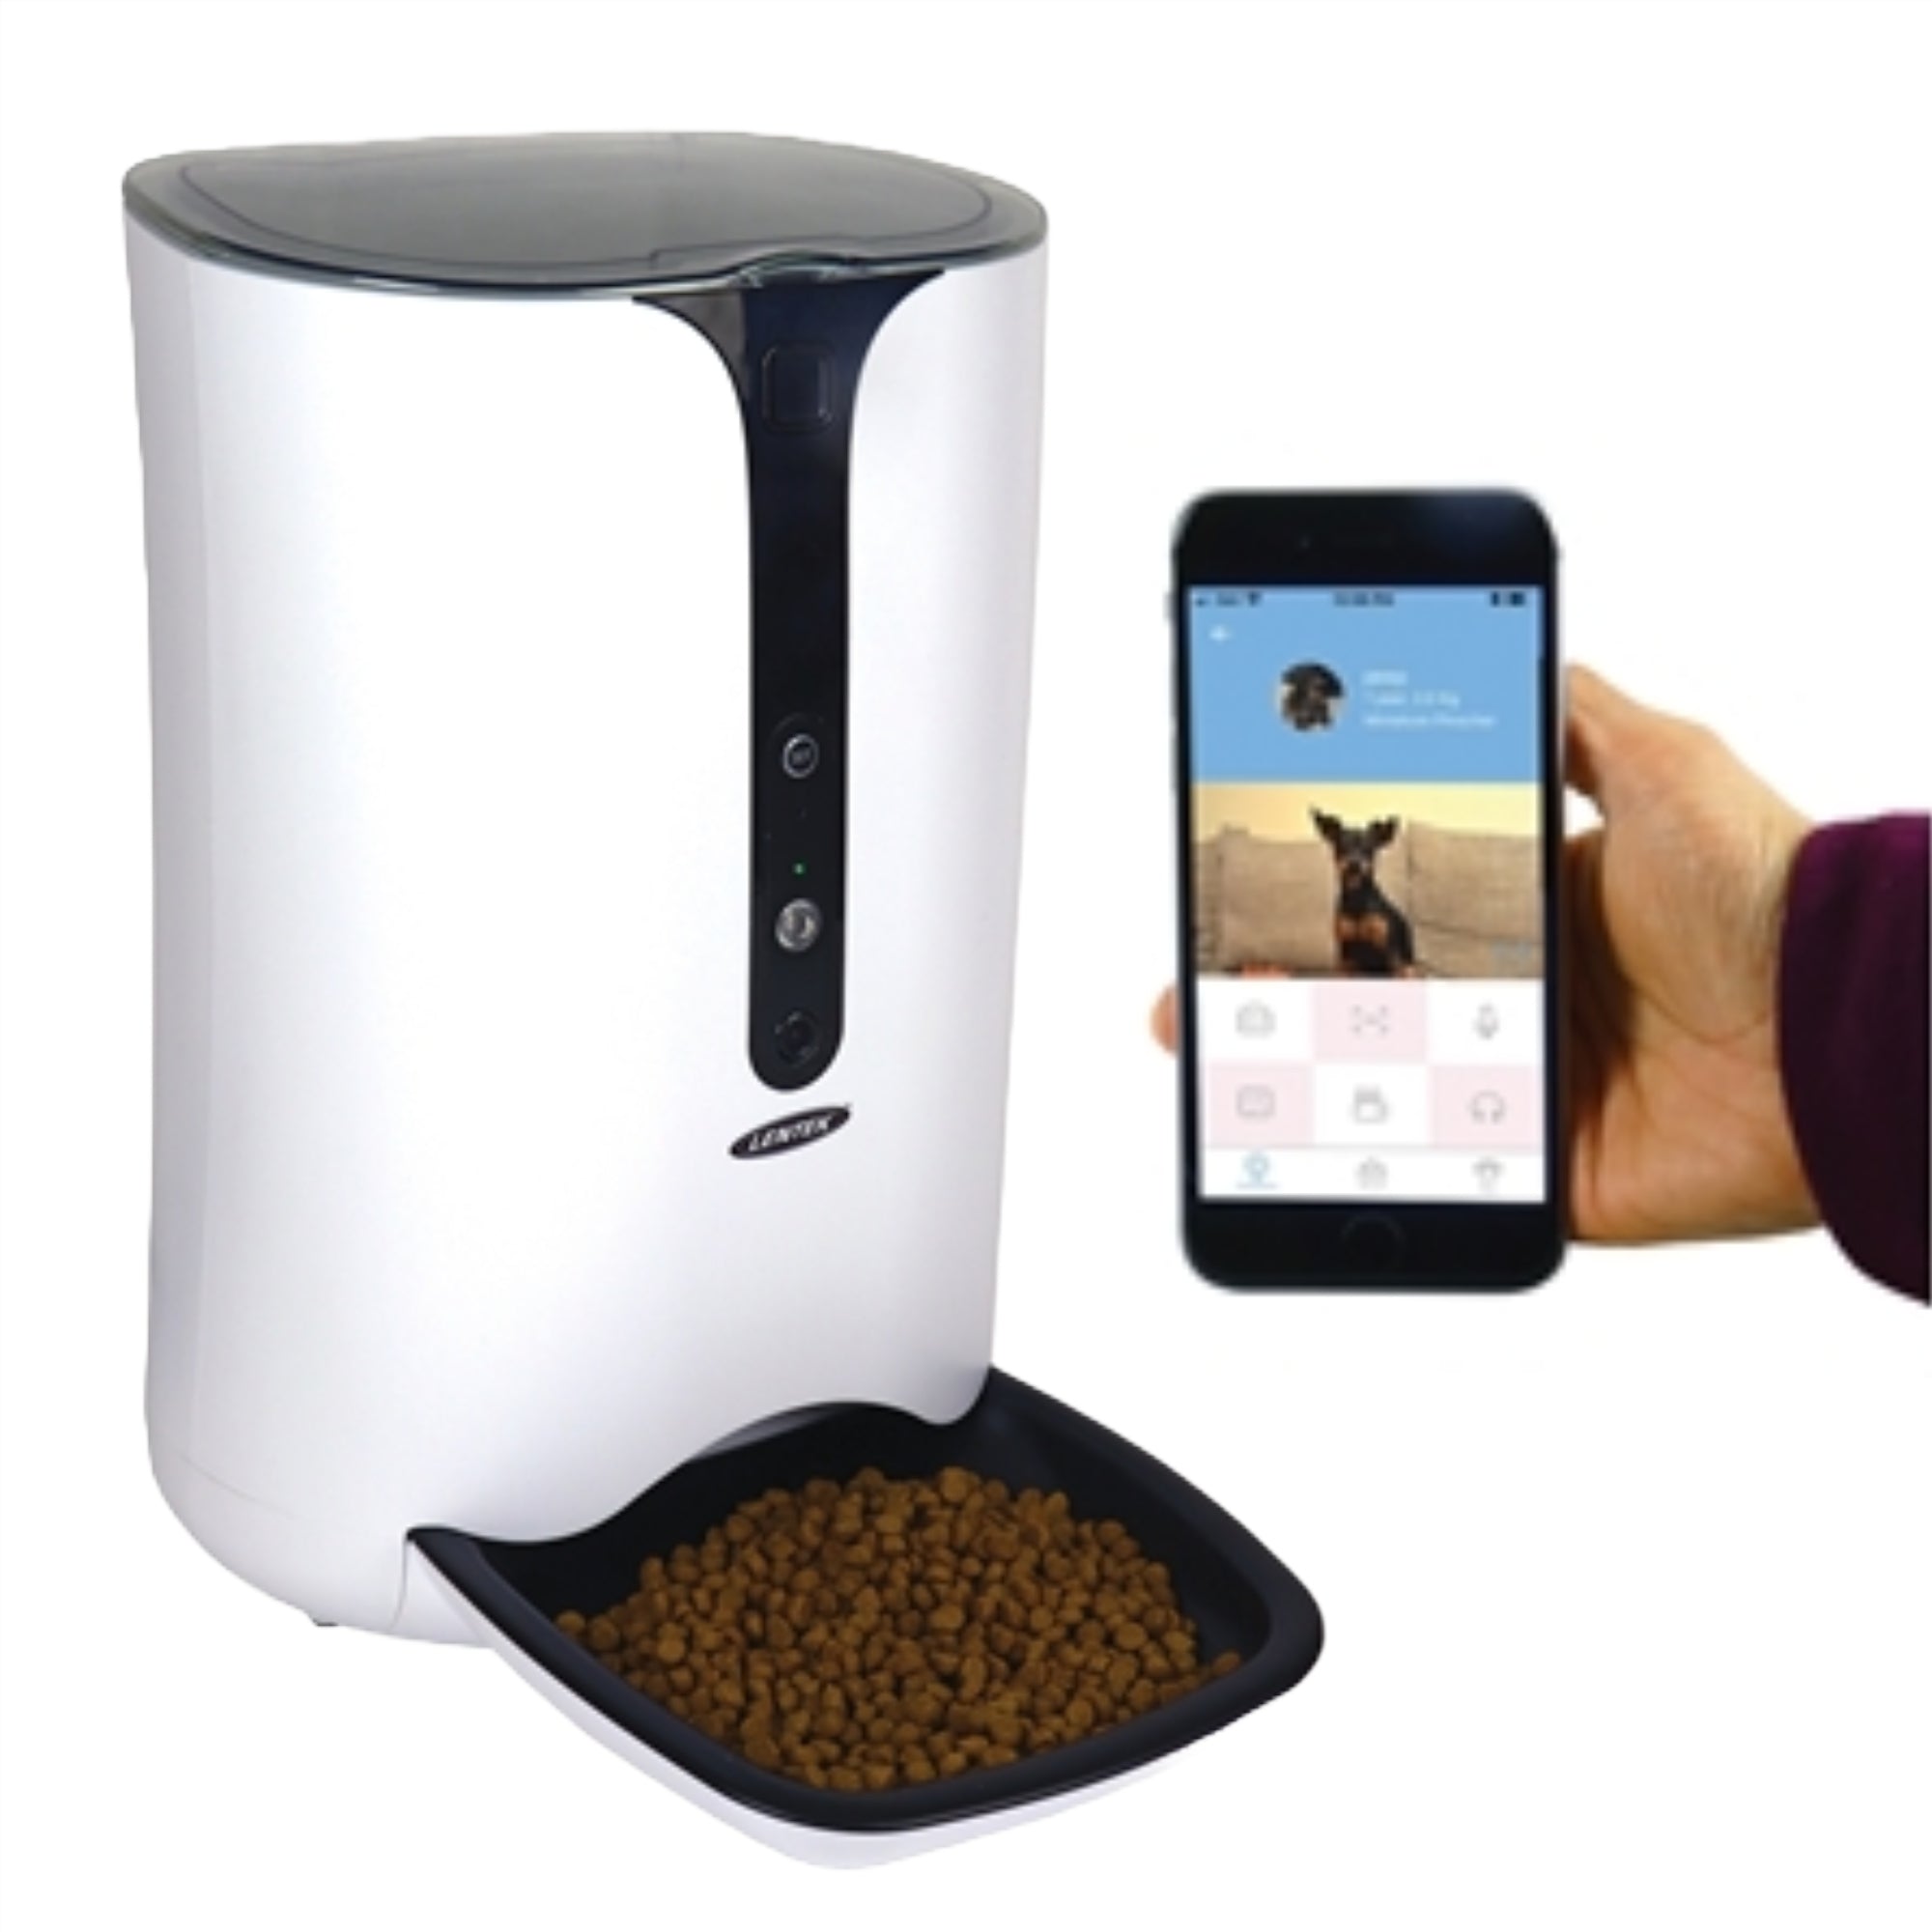 Product shot of the Lentek pet feeder on a white background with a hand holding a smartphone with the PetU app on the screen